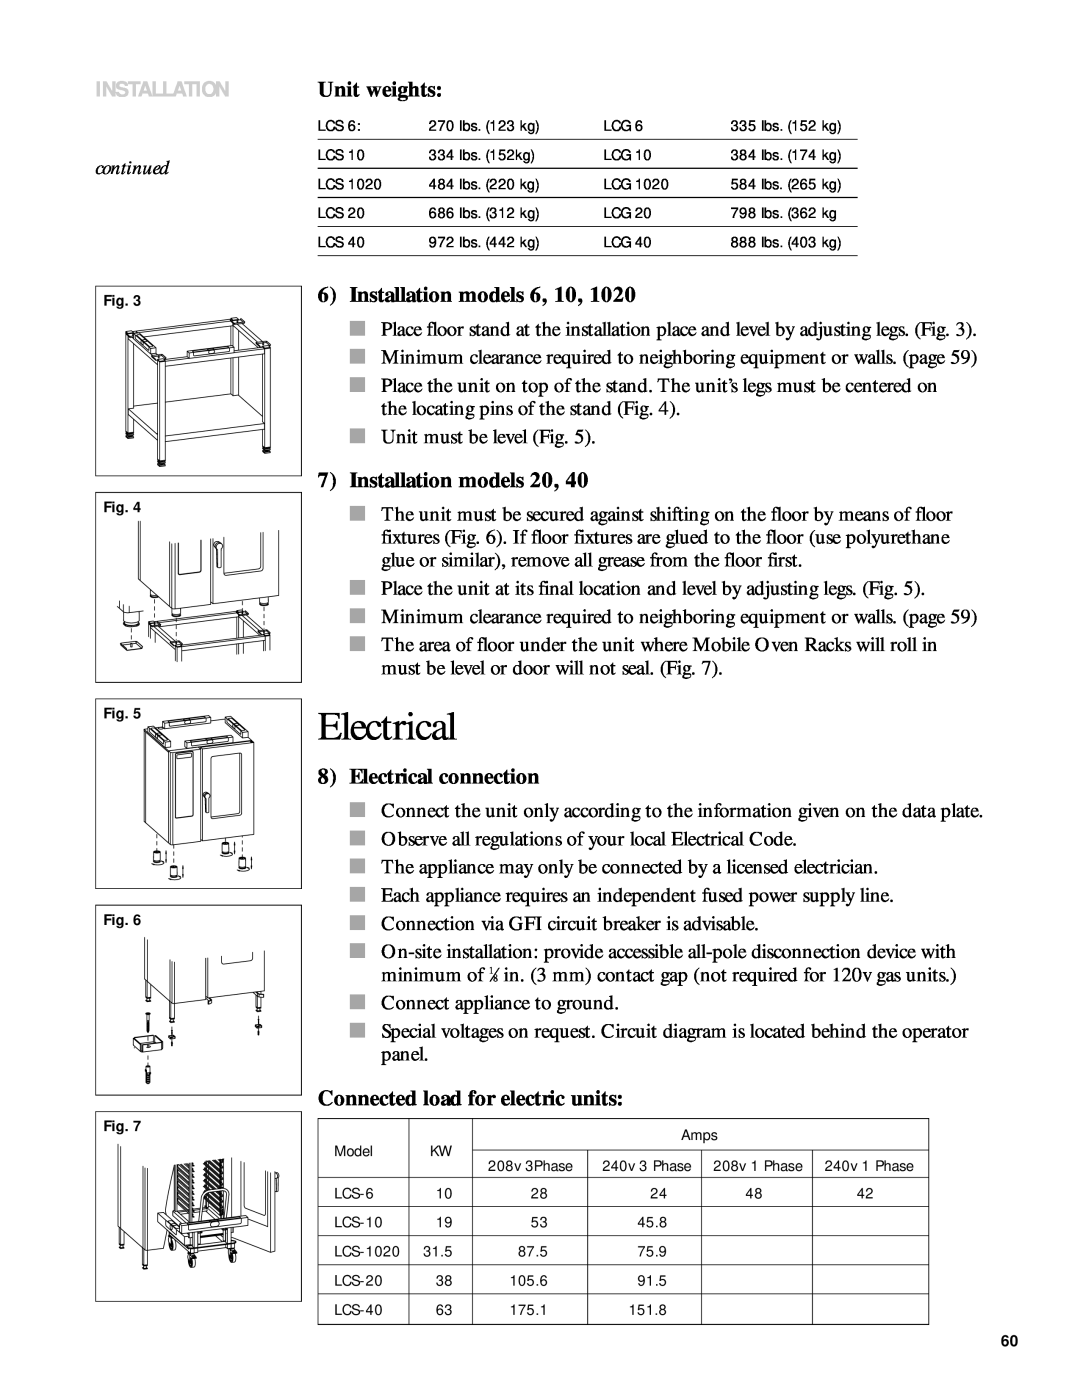 Henny Penny 6 manual Unit weights, Installation models, Electrical connection, Connected load for electric units 